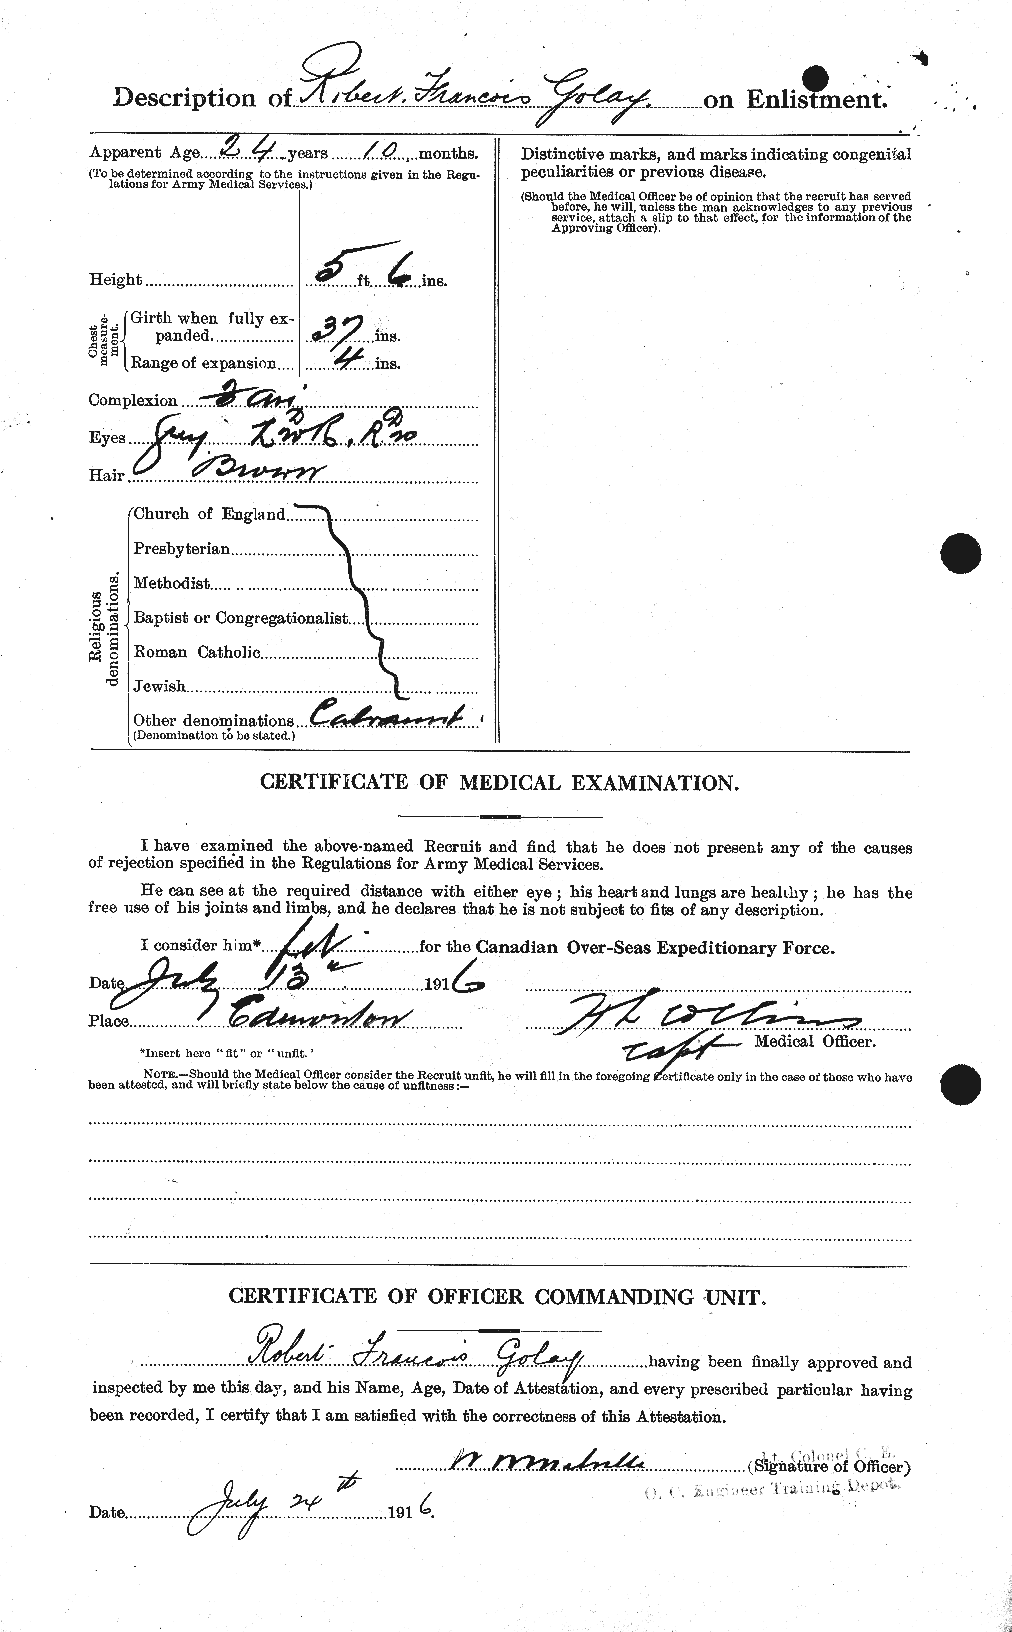 Personnel Records of the First World War - CEF 352167b